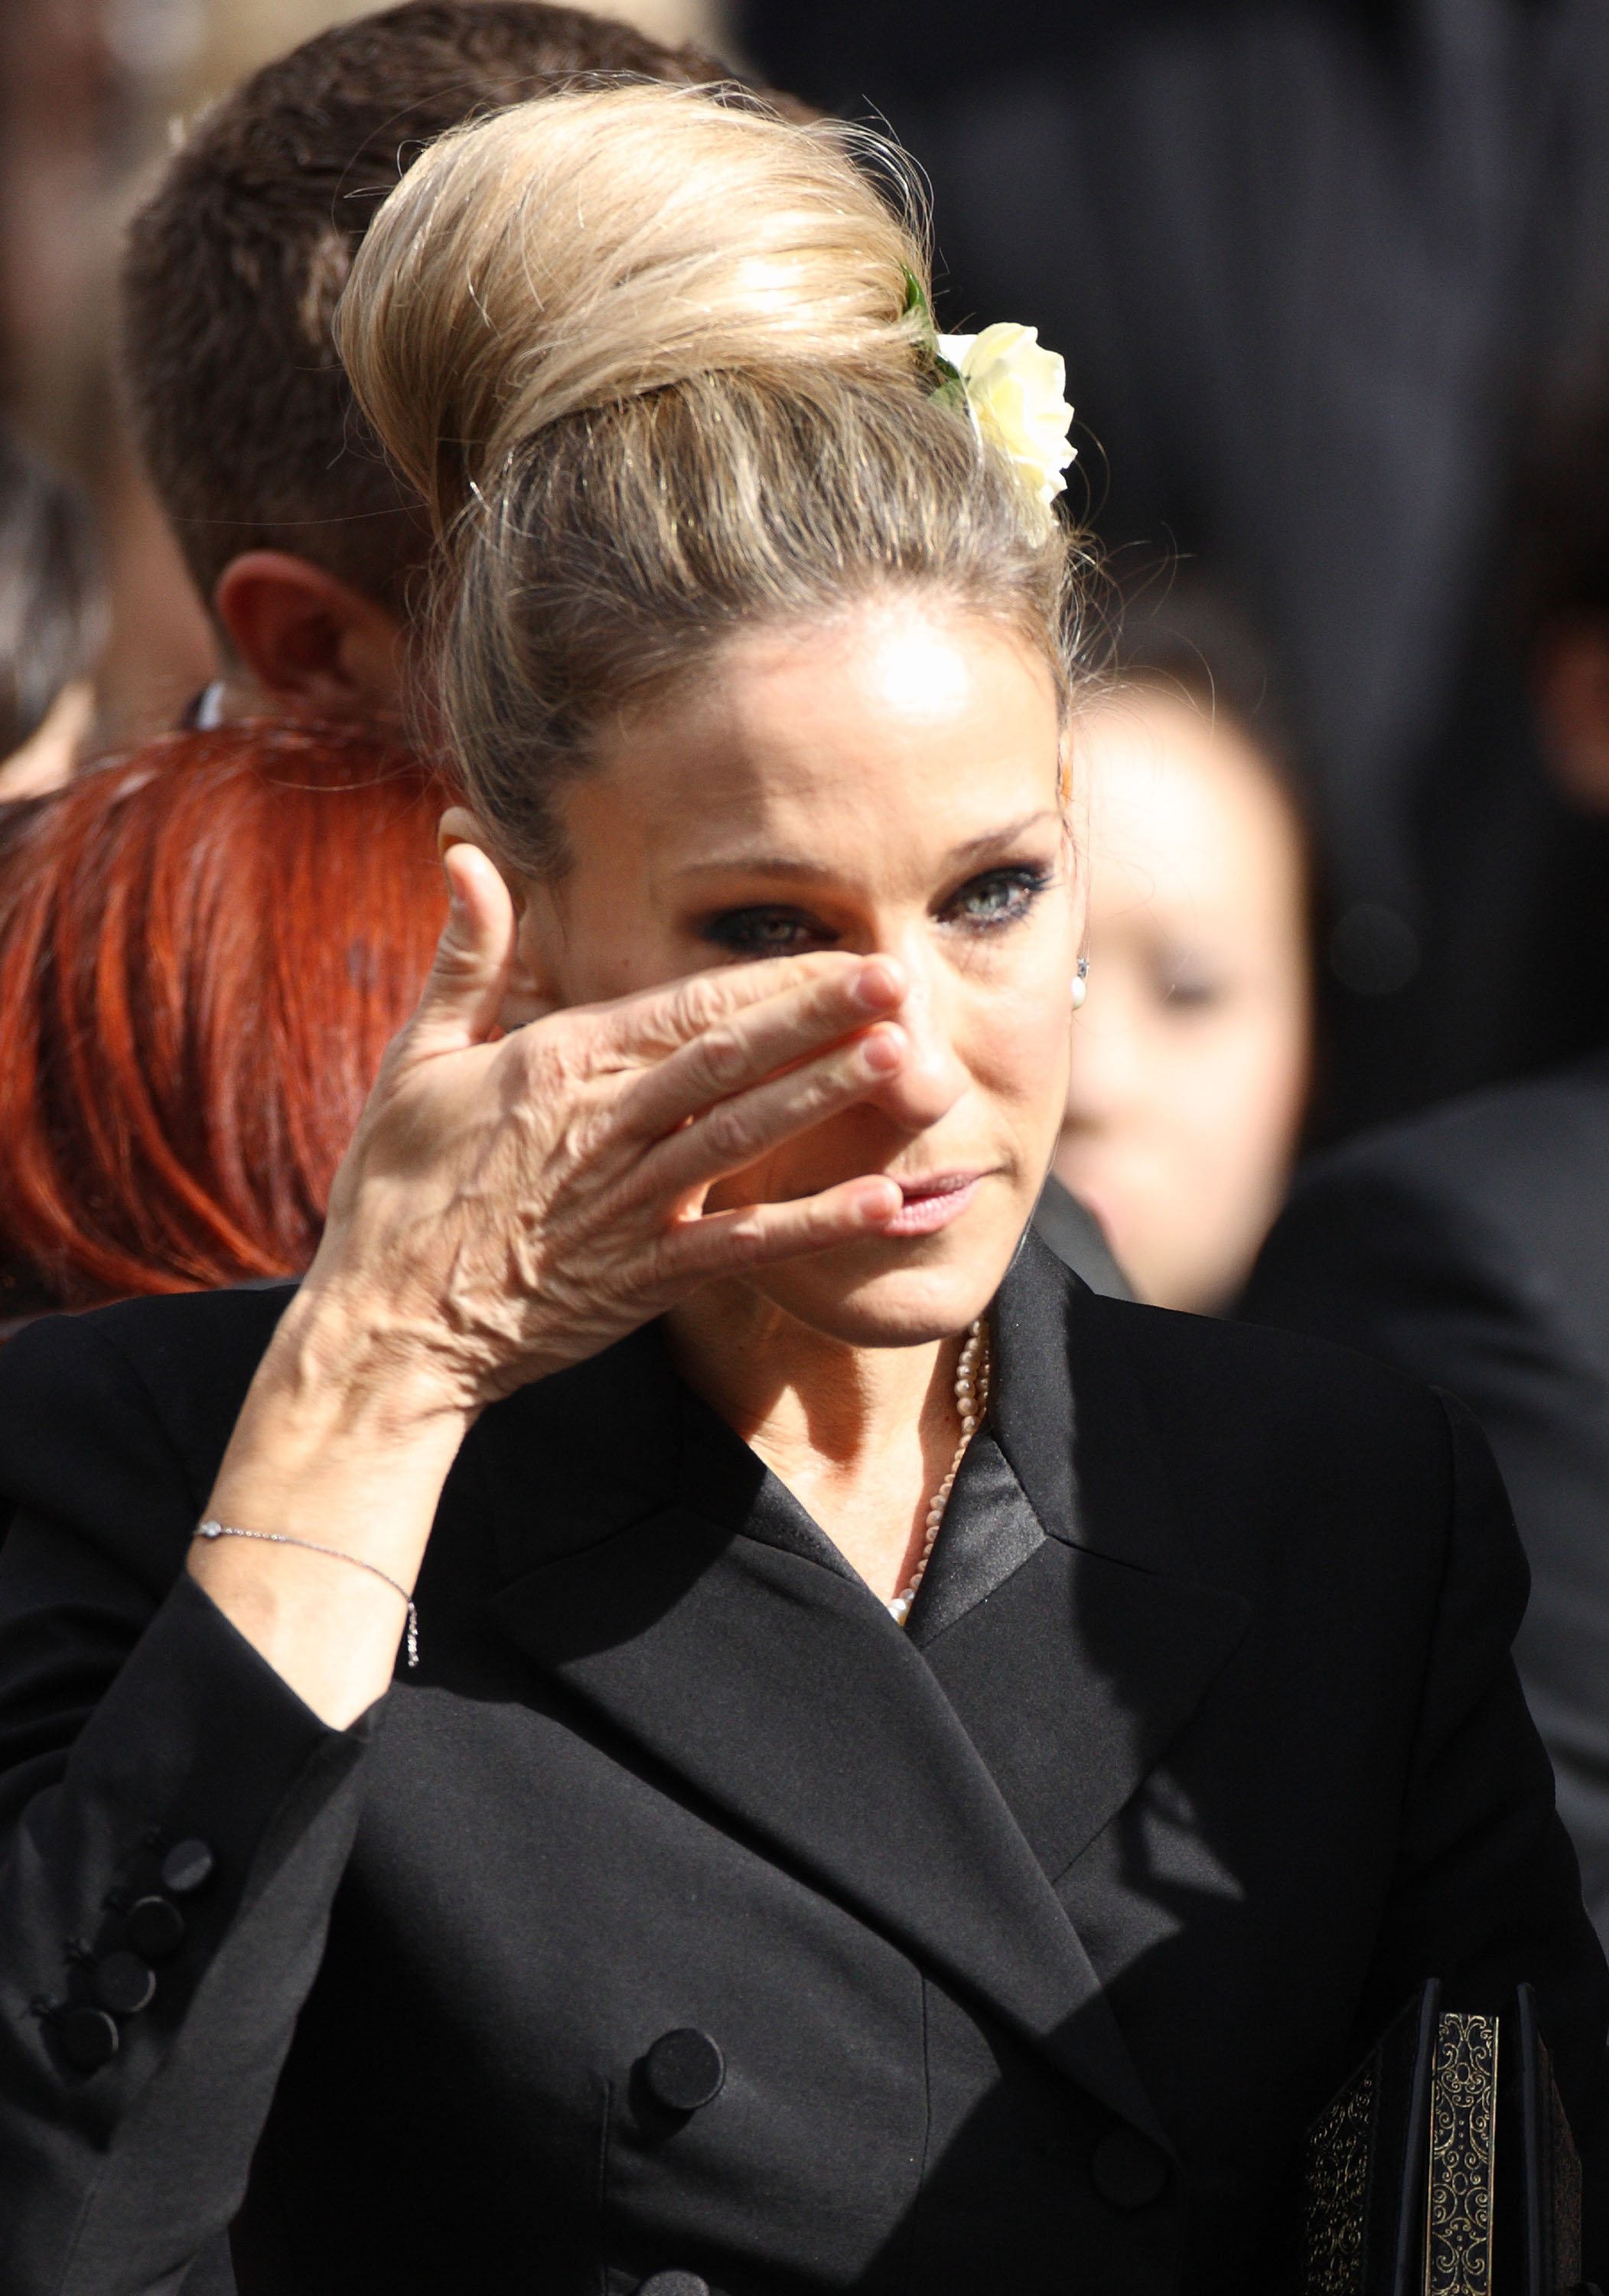 Sarah Jessica Parker at the memorial service for Alexander McQueen at St Paul's Cathedral on September 20, 2010, in London, England | Source: Getty Images